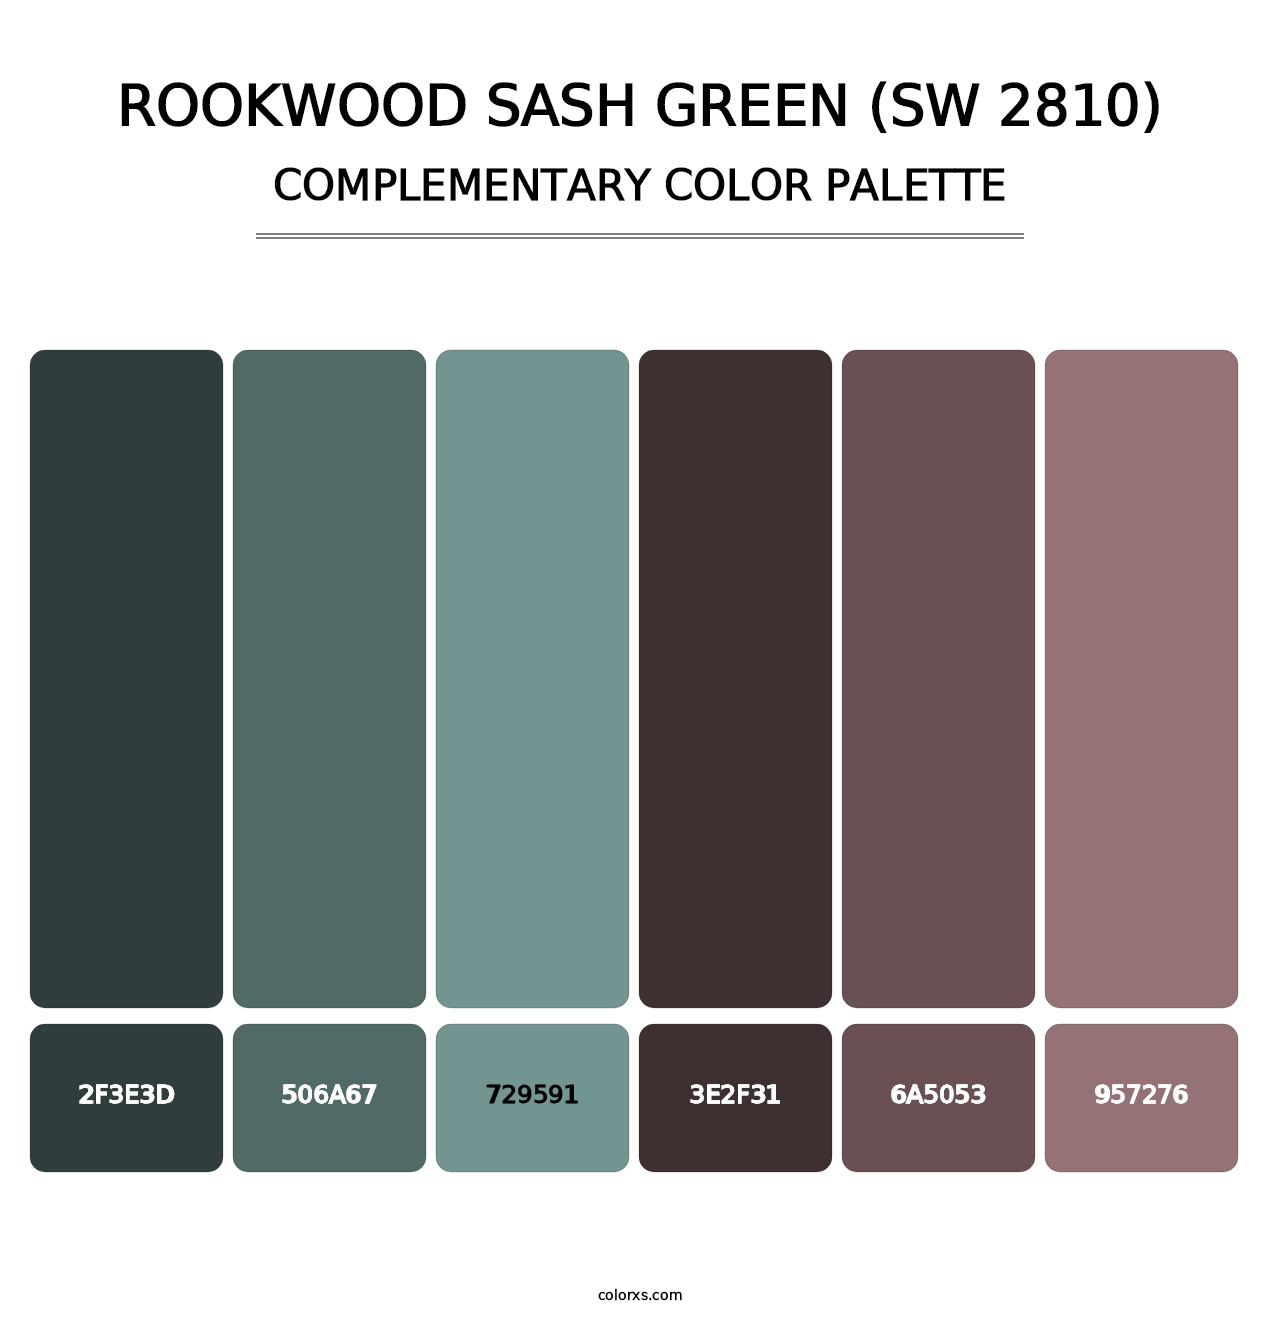 Rookwood Sash Green (SW 2810) - Complementary Color Palette